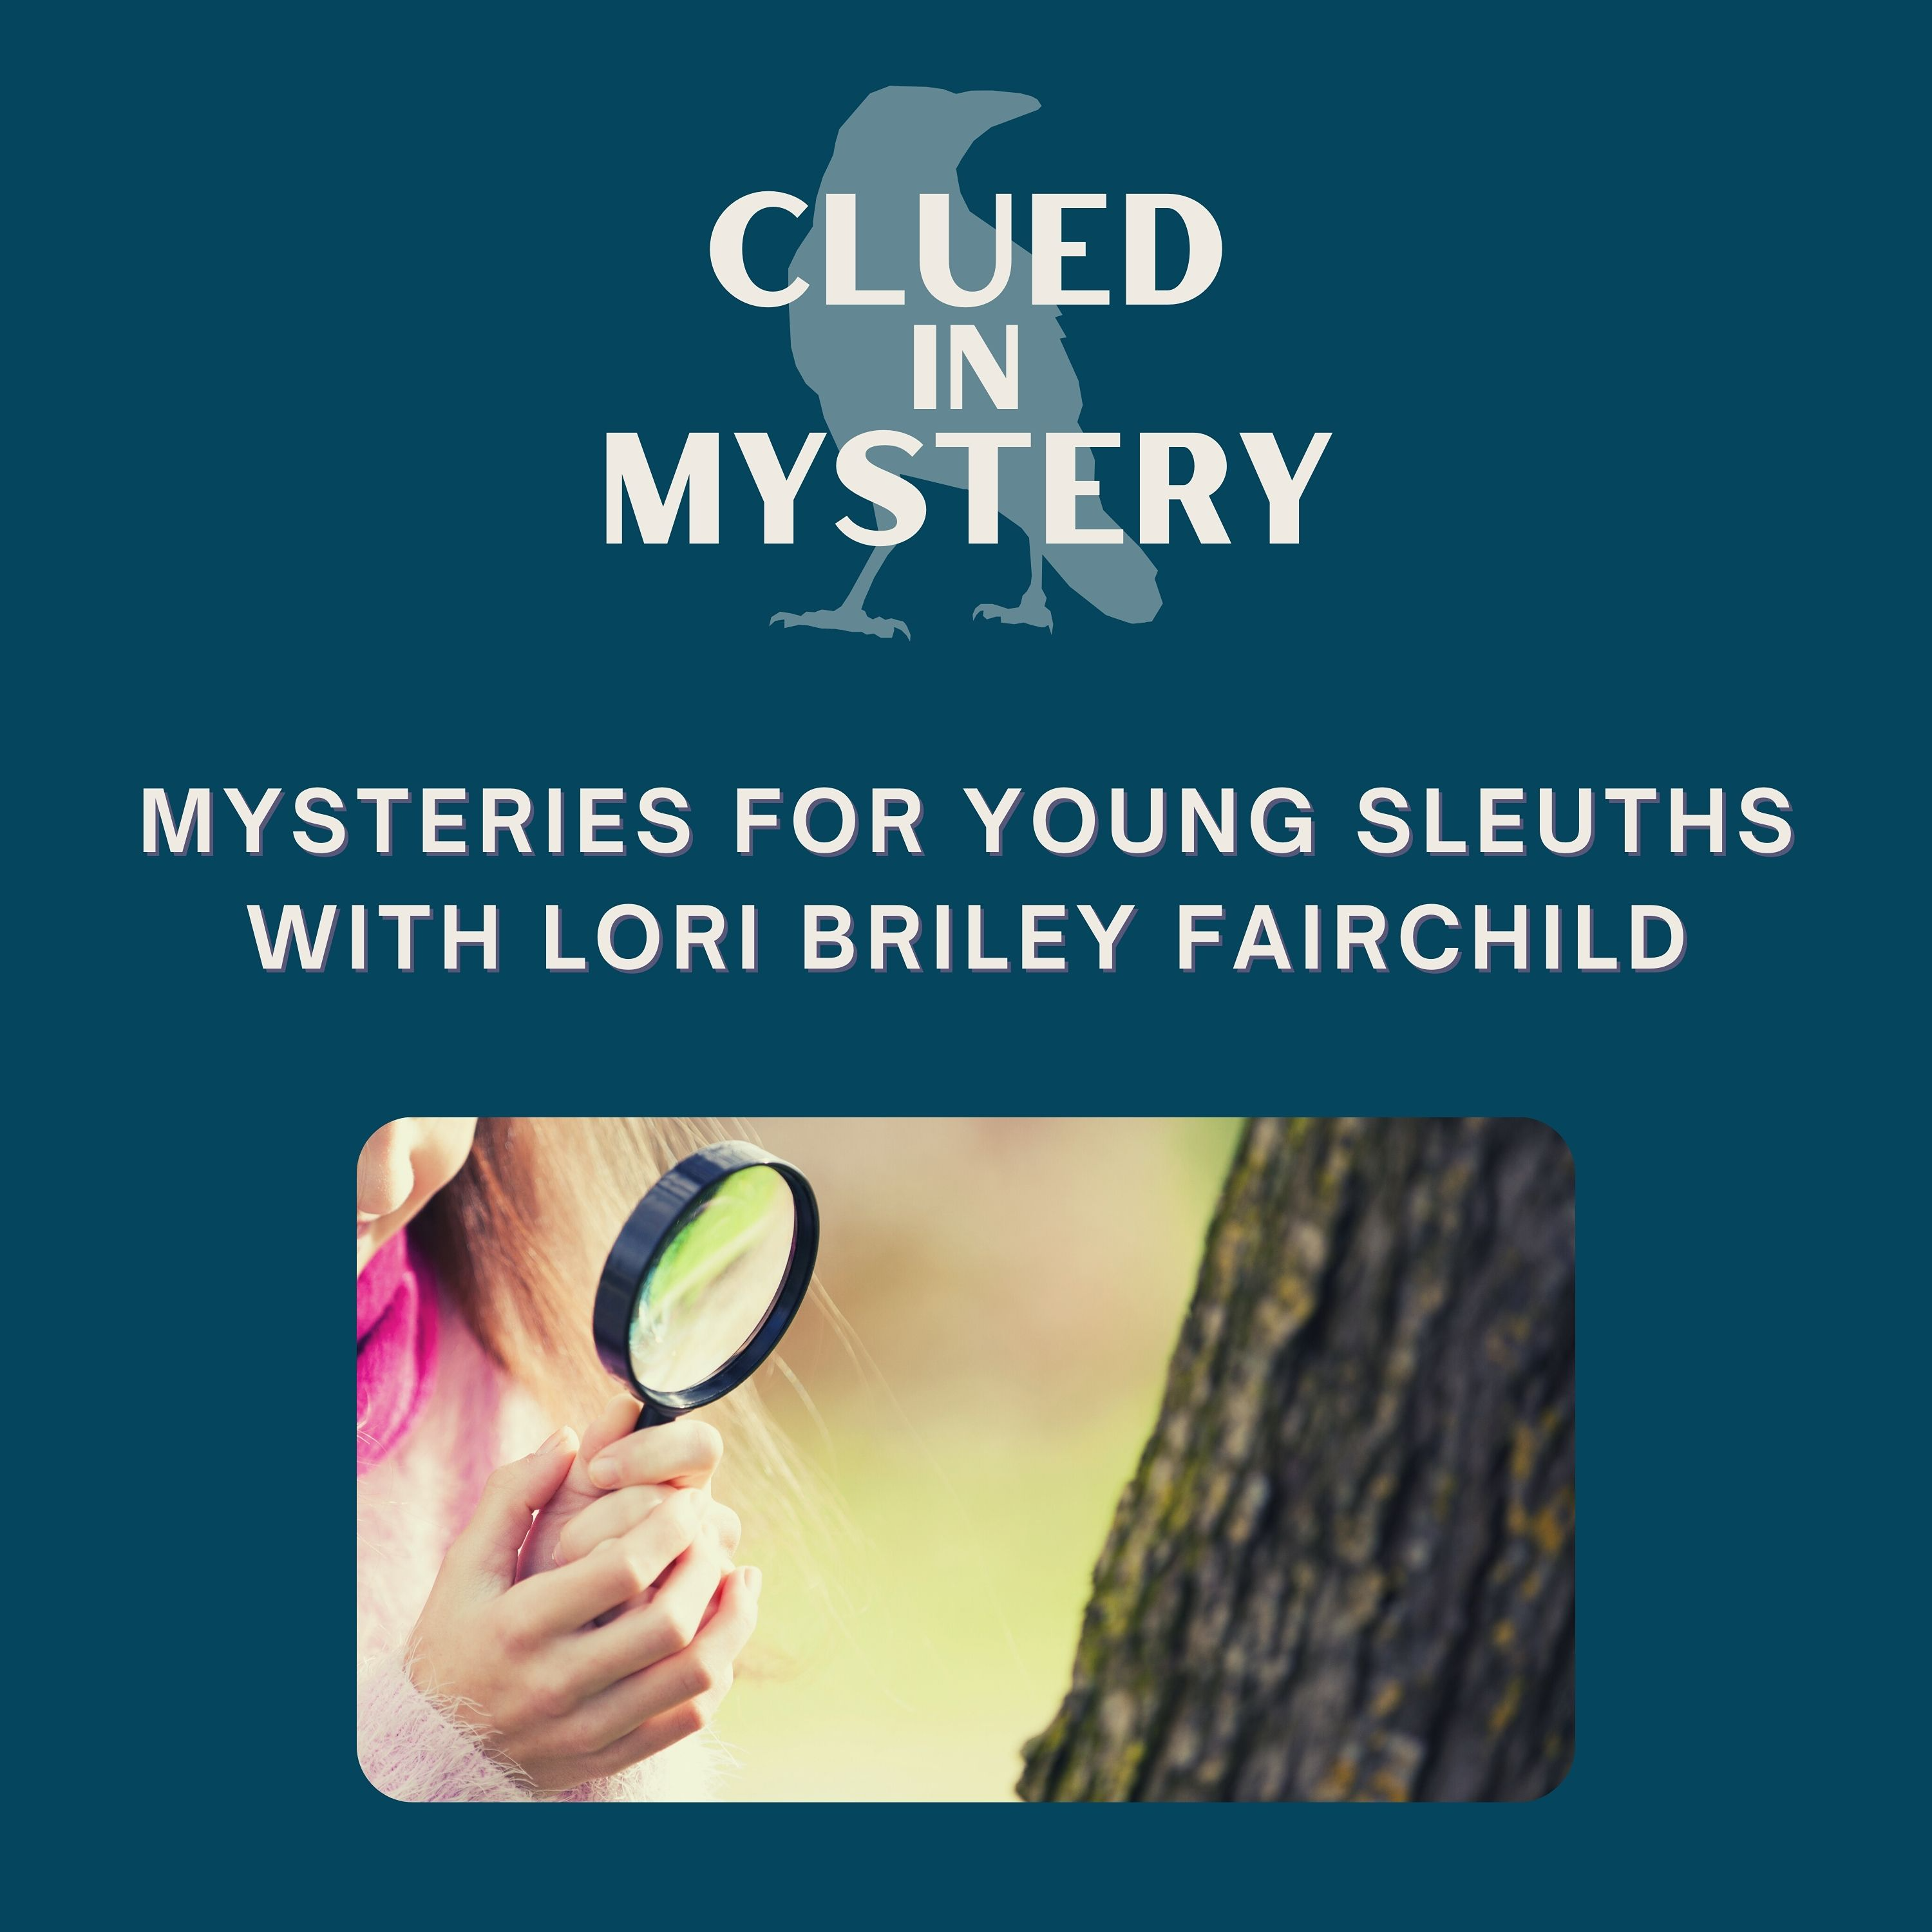 Mysteries for Young Sleuths with Lori Briley Fairchild